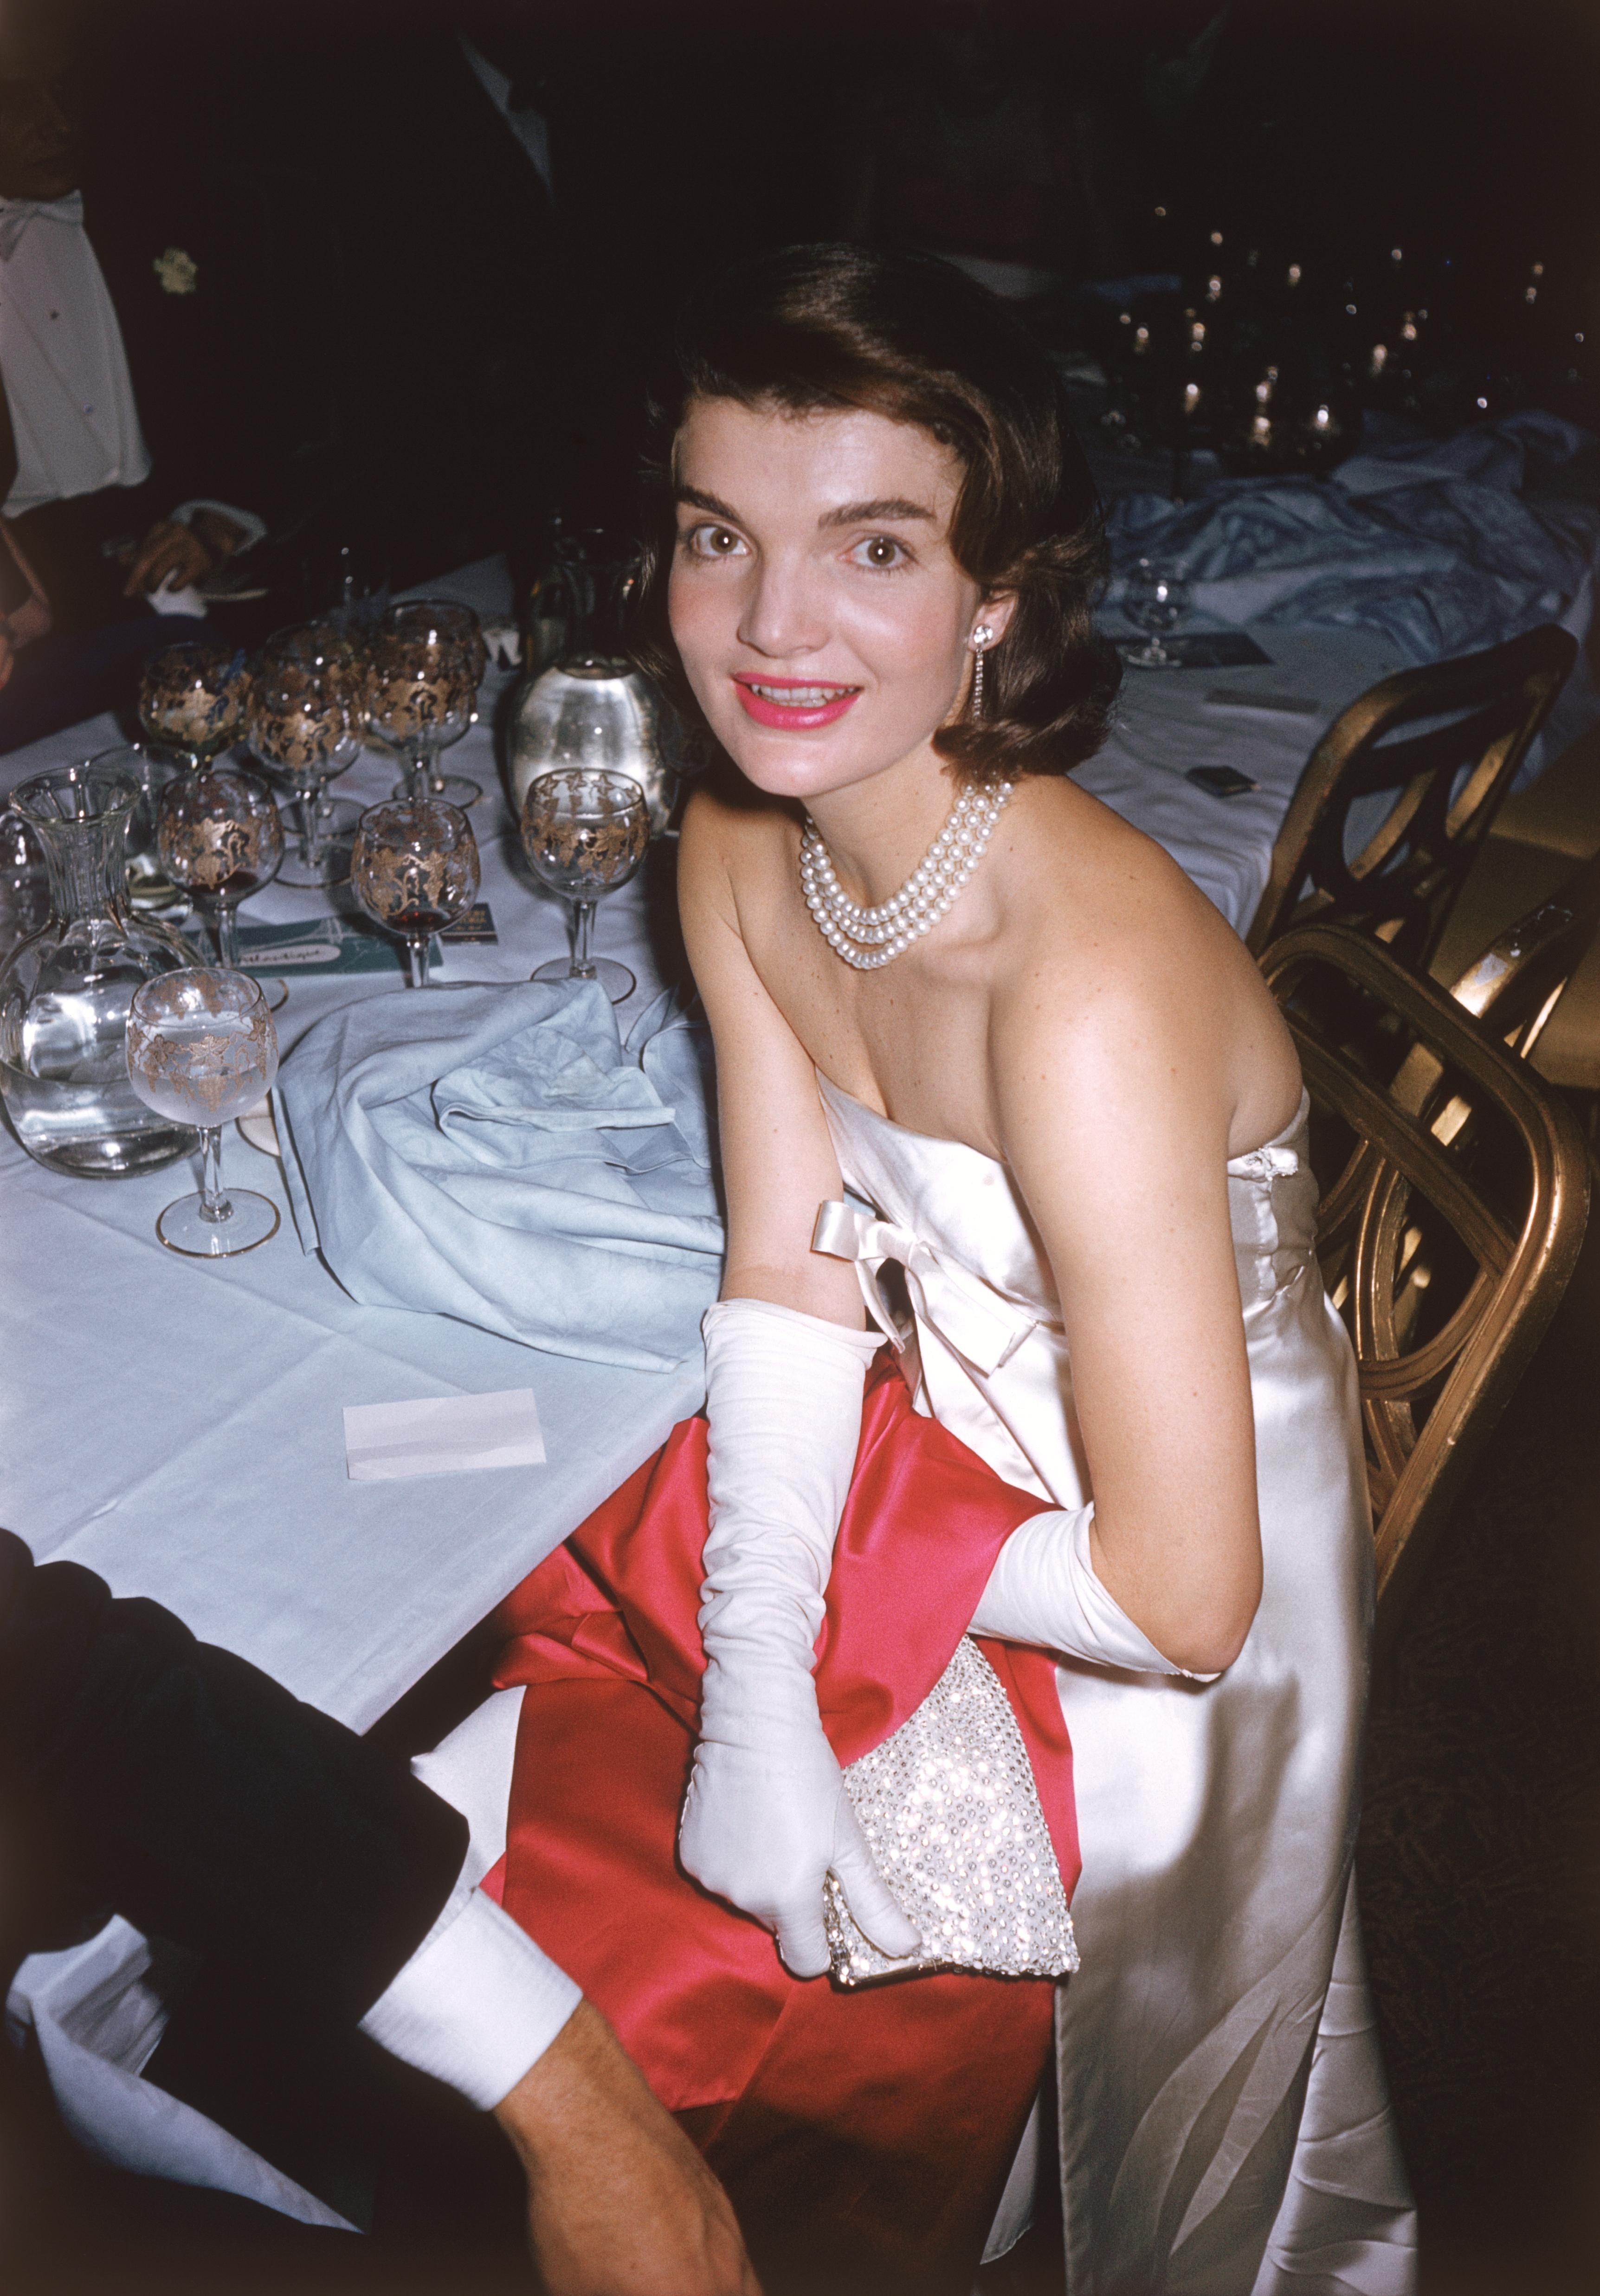 Jackie K, Estate Edition Photograph [Classic Pearls Jacqueline Kennedy]